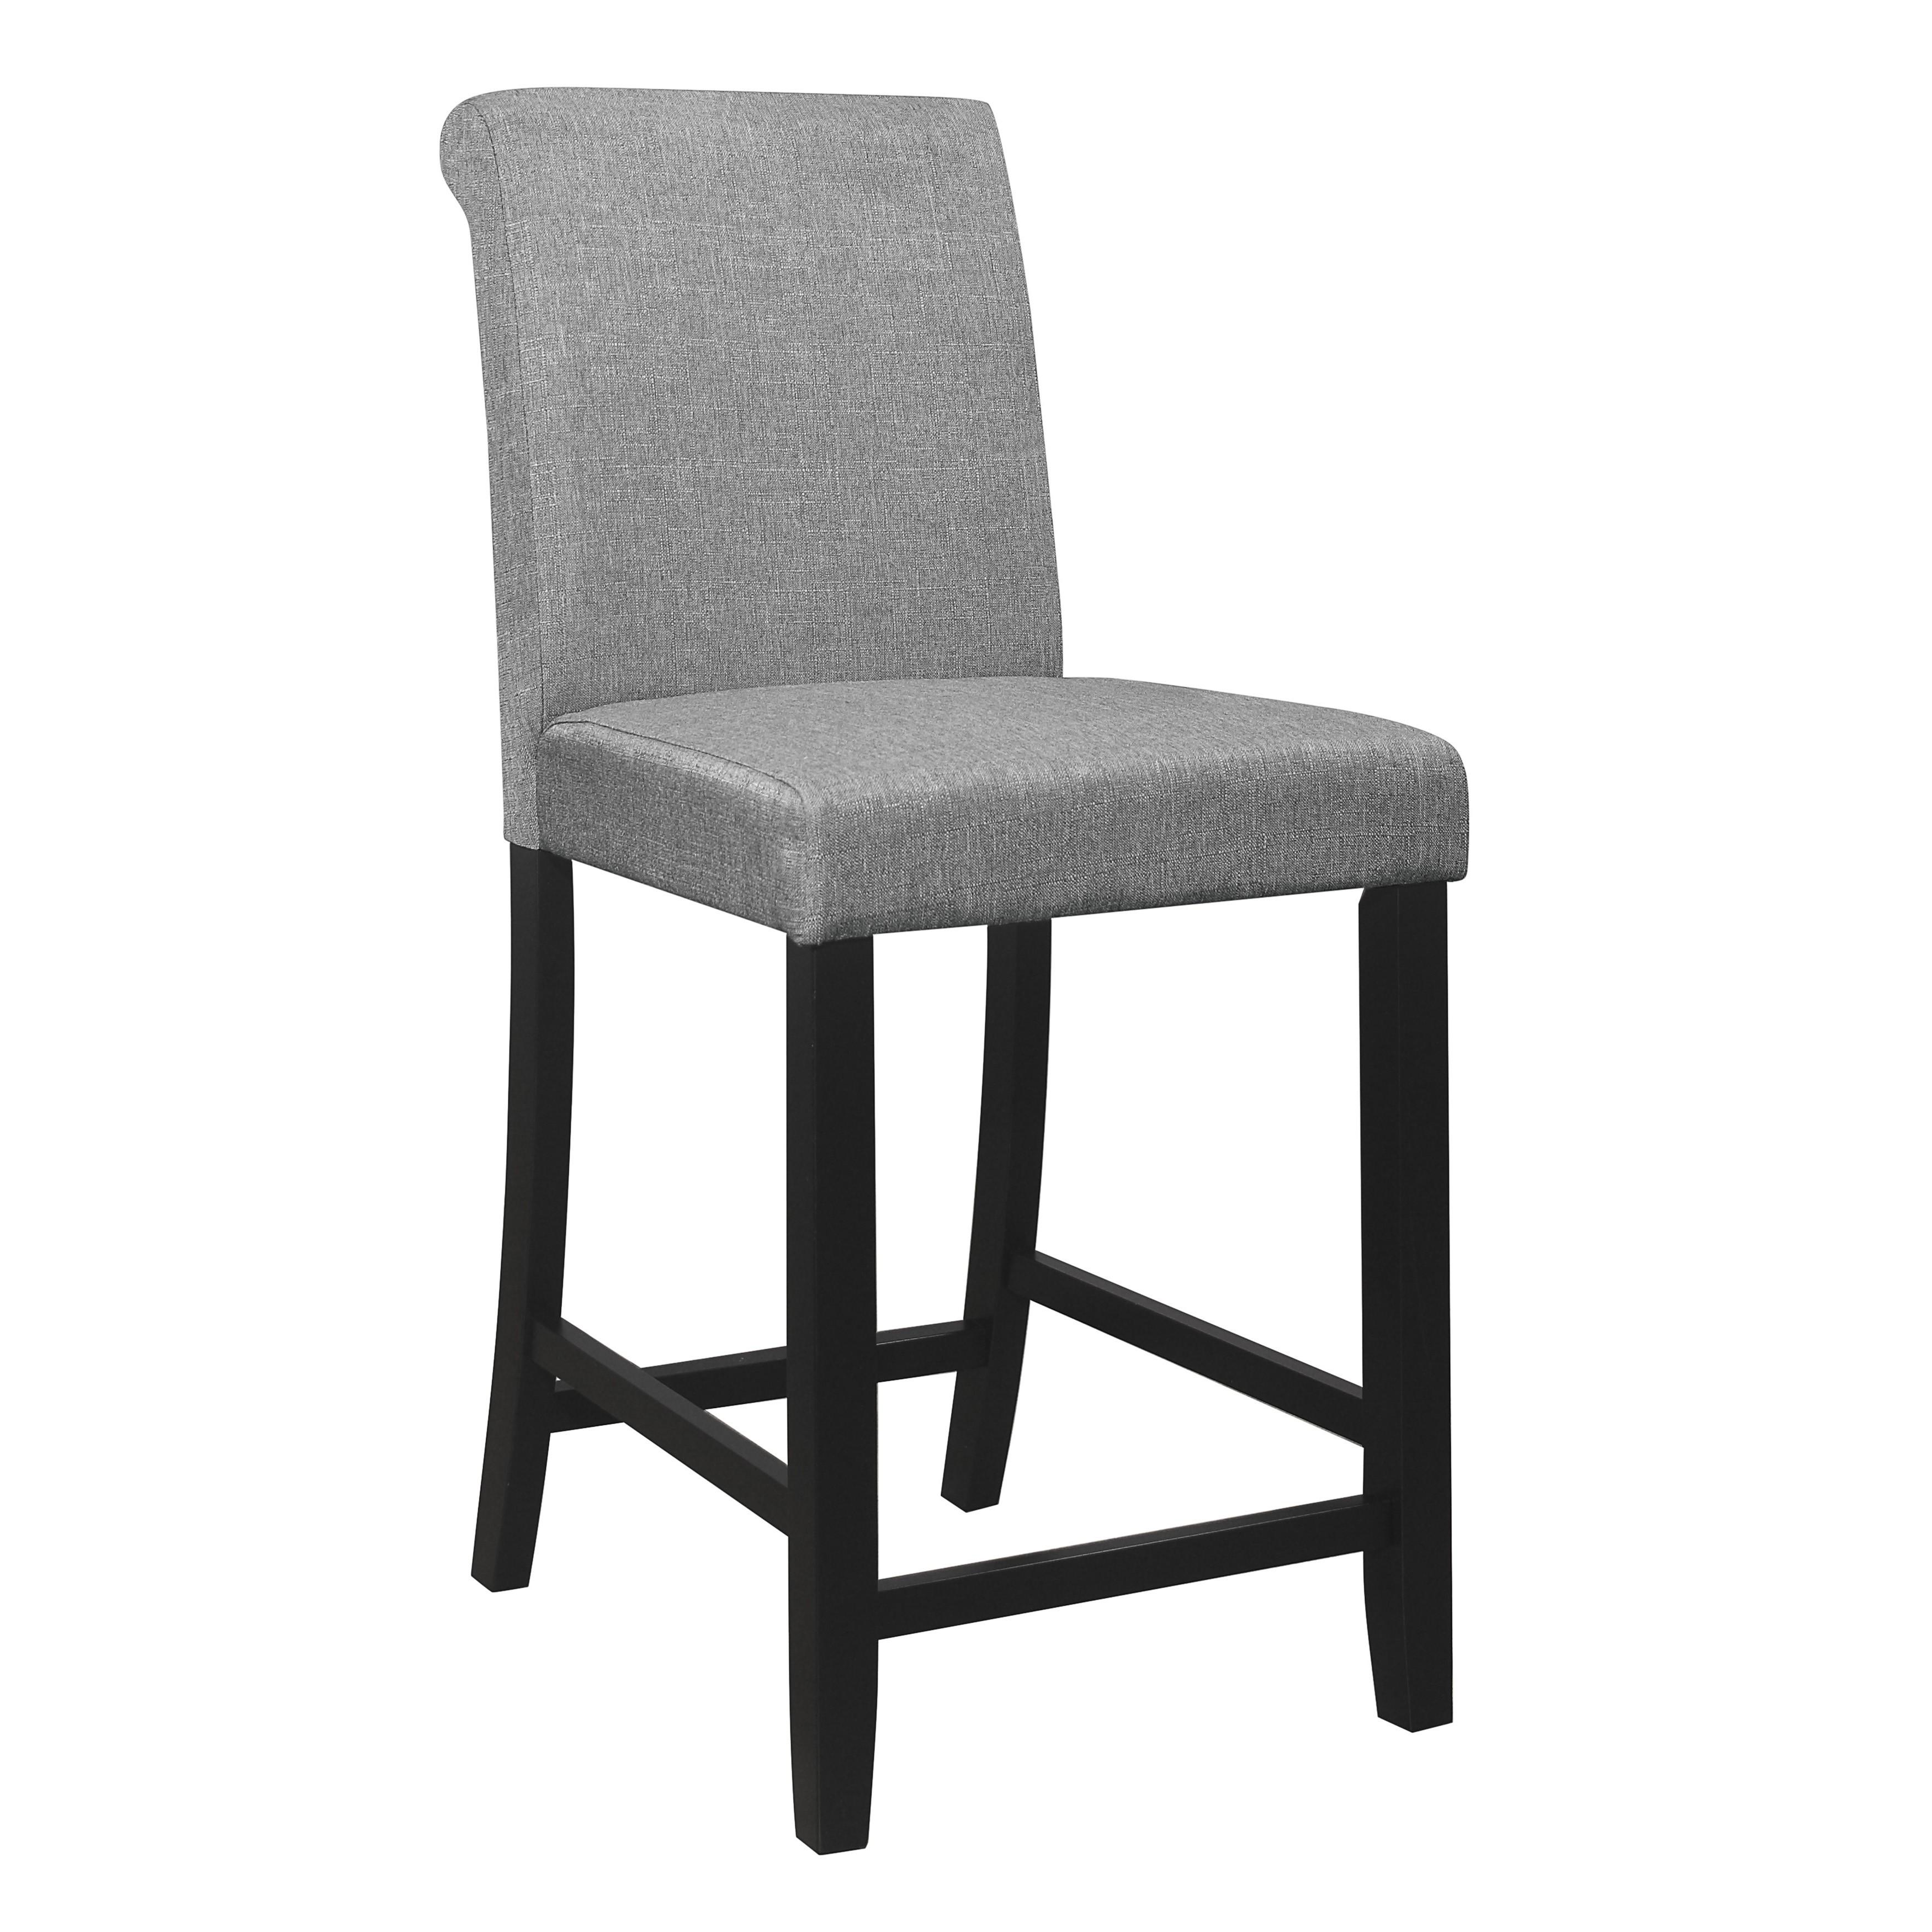 Transitional Counter Height Chair 5801-24 Adina 5801-24 in Black Polyester